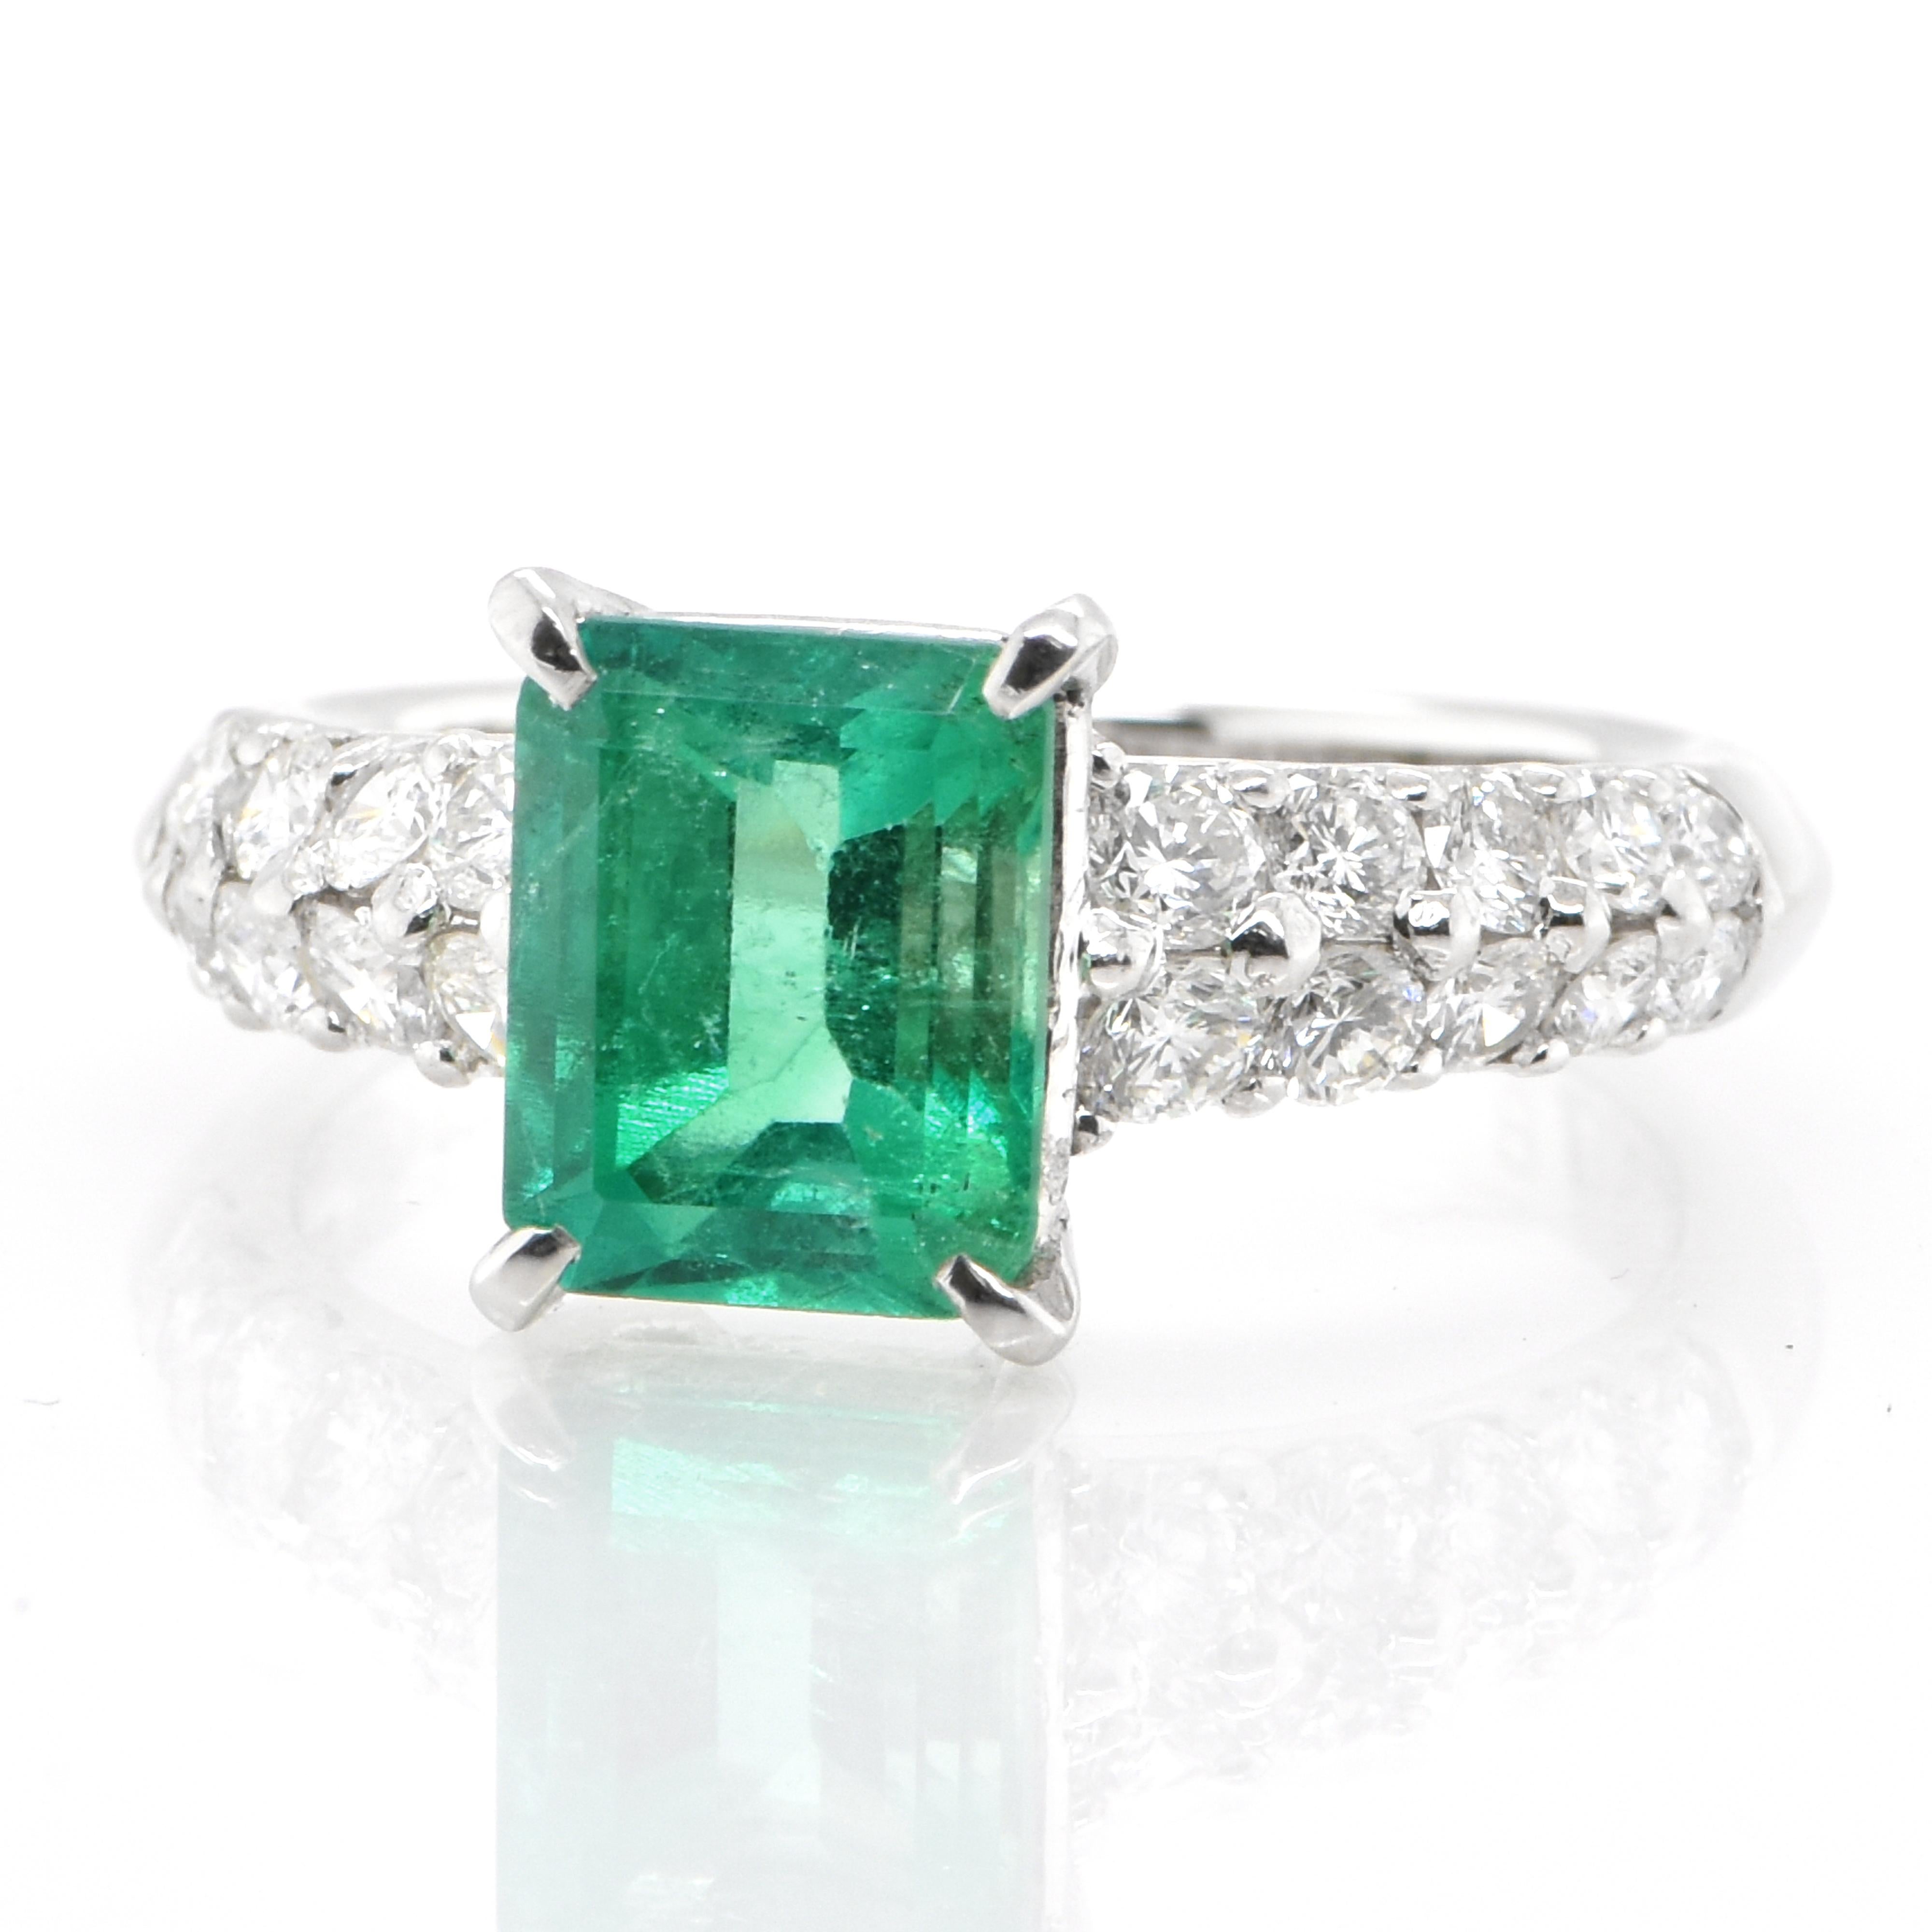 A stunning ring featuring a 1.65 Carat Natural Emerald and 0.78 Carats of Diamond Accents set in Platinum. People have admired emerald’s green for thousands of years. Emeralds have always been associated with the lushest landscapes and the richest